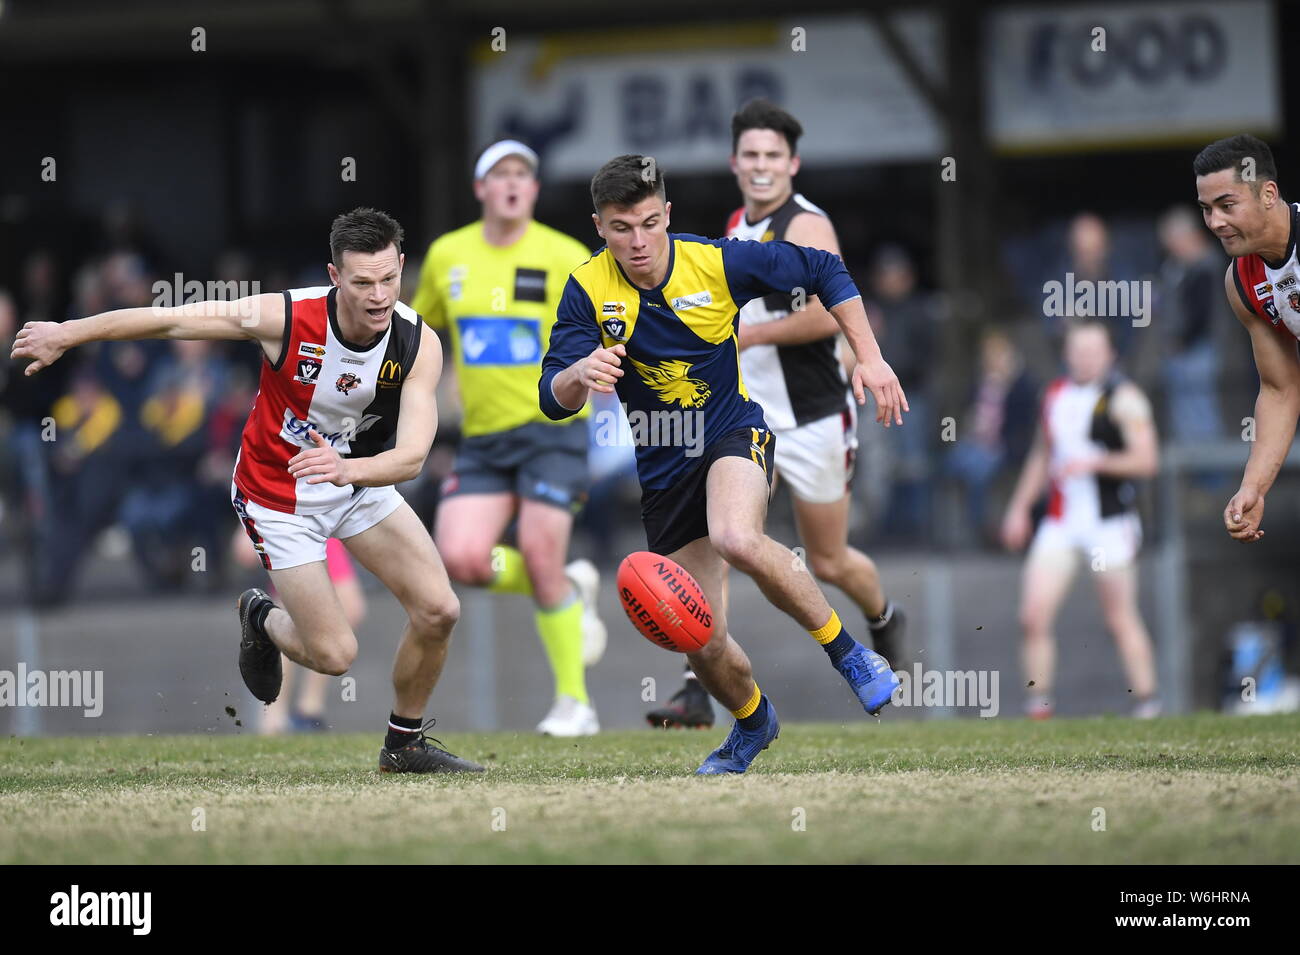 Charging for the footie, Benalla take on Mansfield in the Goulburn Valley Football League. Grass roots footy is popular in regional Australia Stock Photo